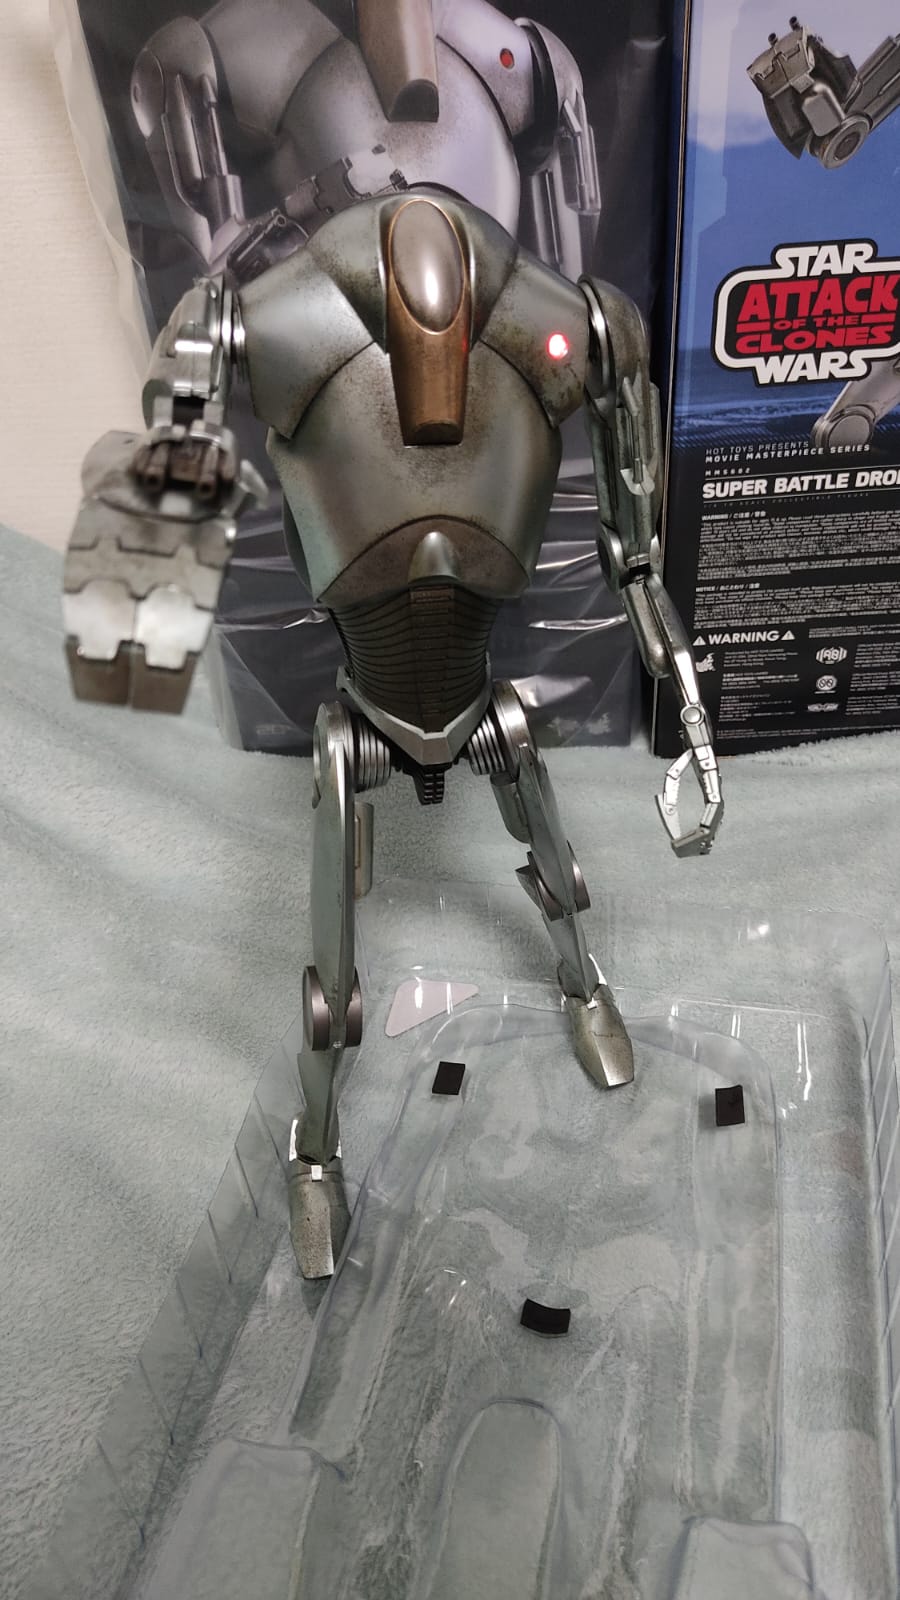 SuperBattleDroid - NEW PRODUCT: HOT TOYS: STAR WARS EPISODE II: ATTACK OF THE CLONES™ SUPER BATTLE DROID™ 1/6TH SCALE COLLECTIBLE FIGURE Whats162